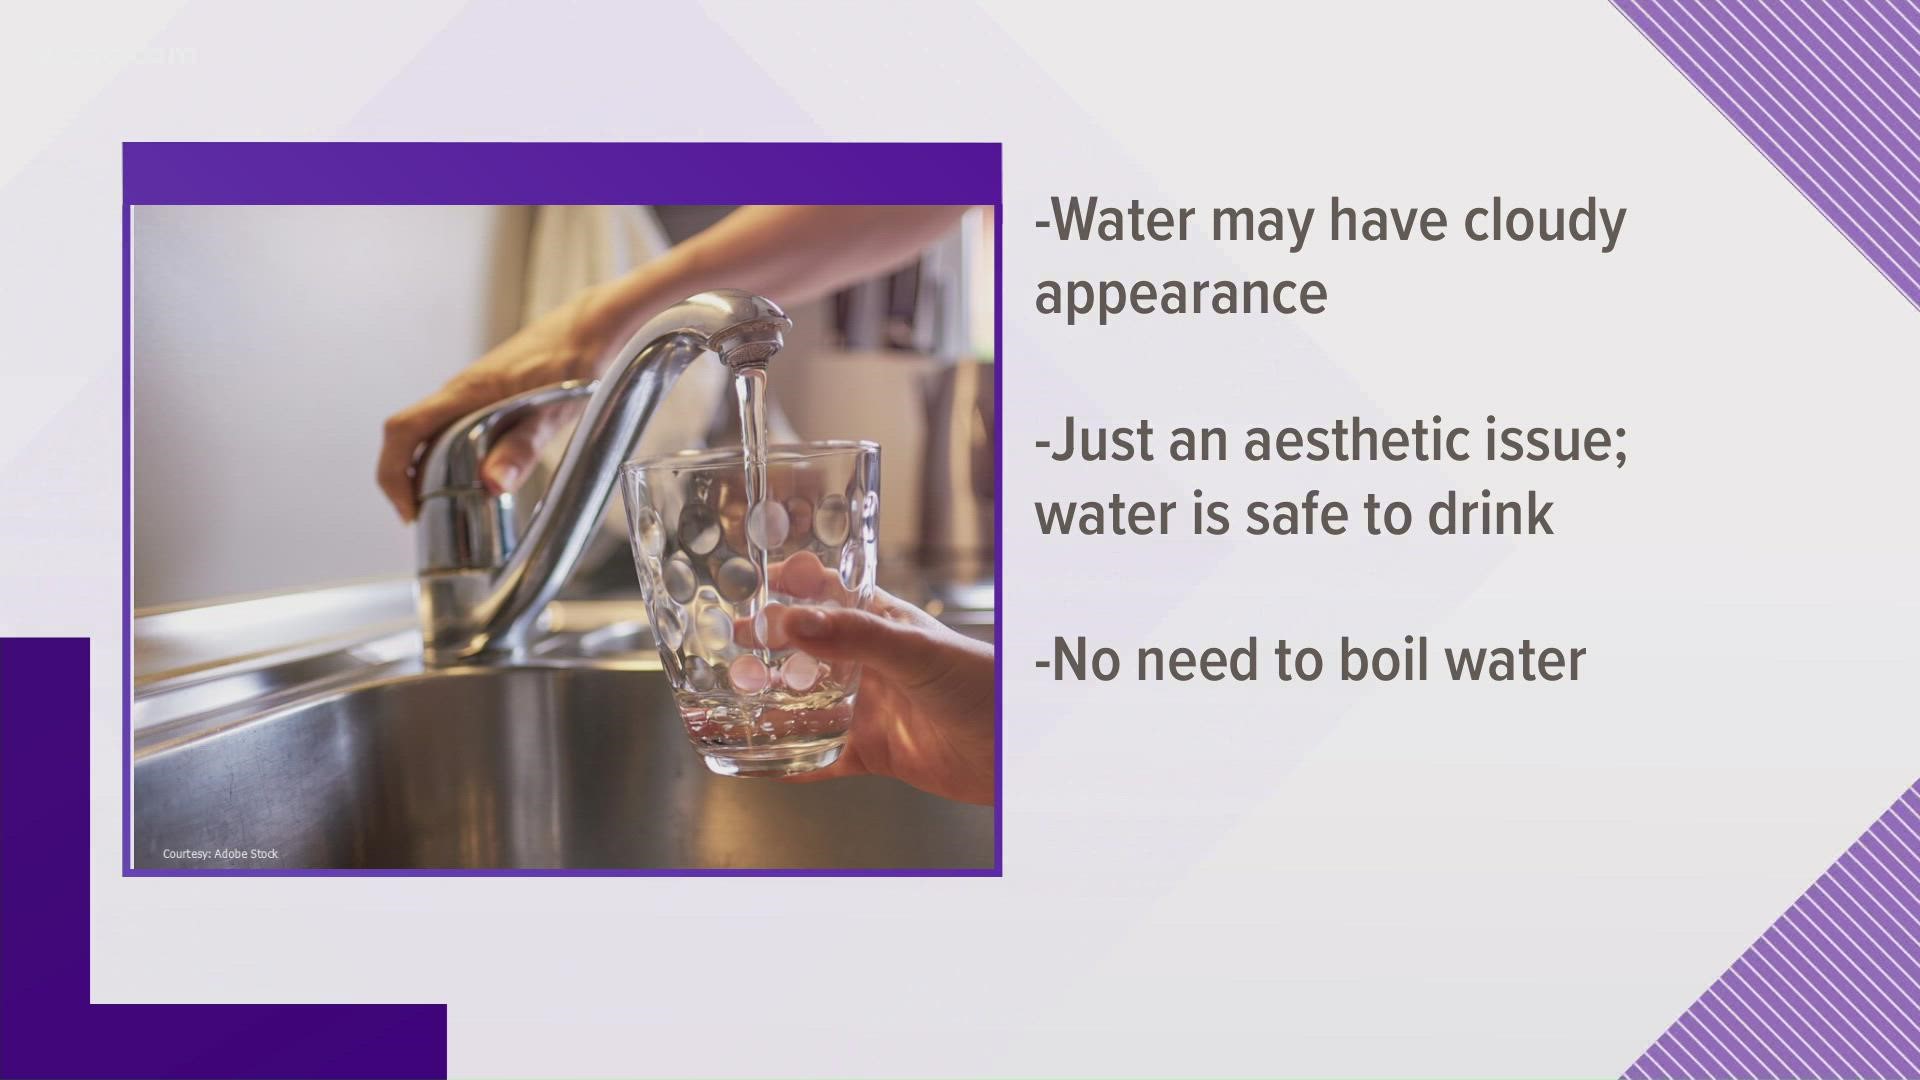 The City of Concord says the water is safe to drink and there's no need to boil it.